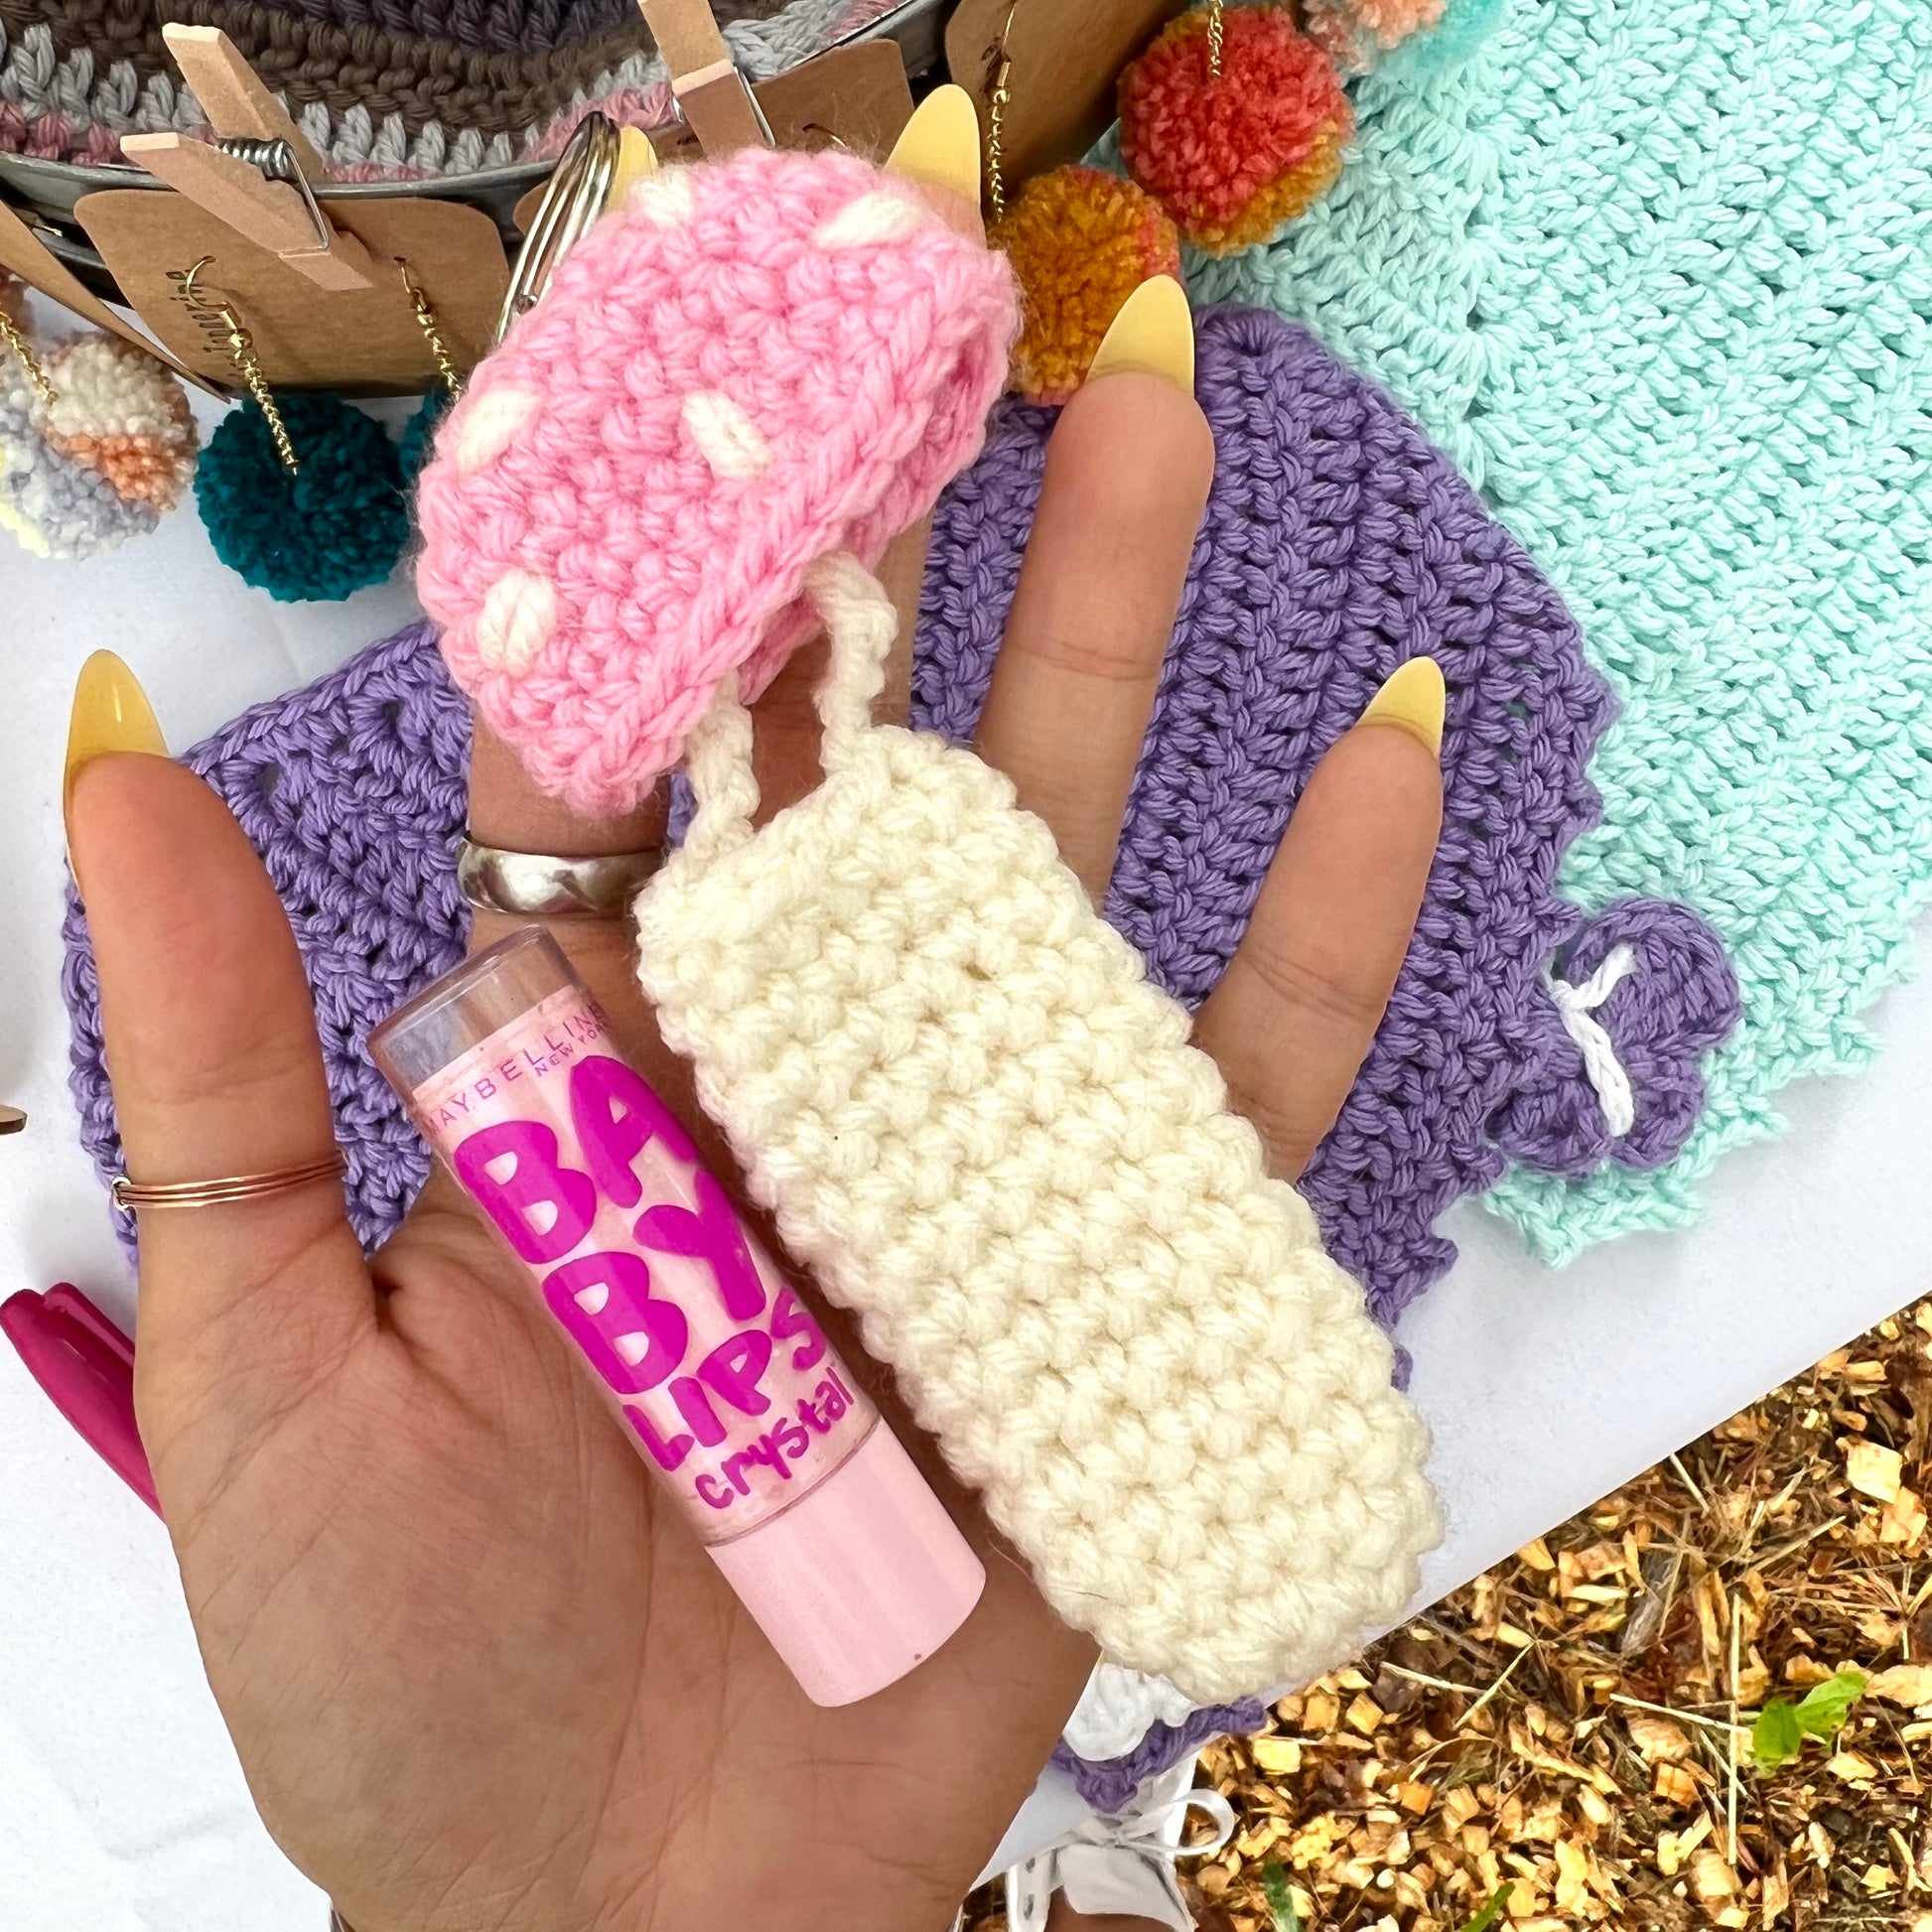 pink and white crochet mushroom keychain that can hold chapstick